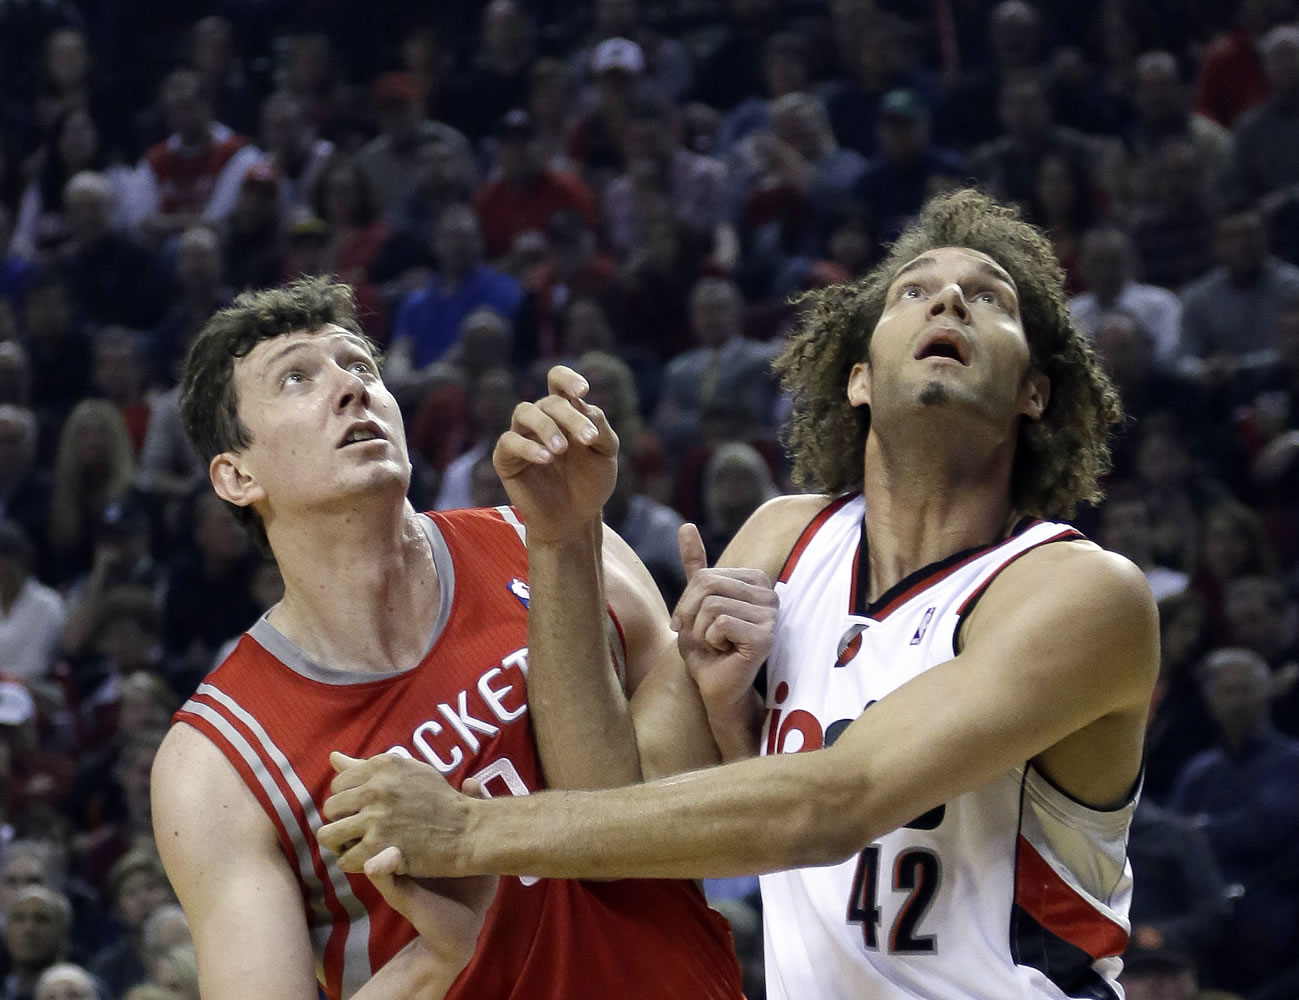 Houston Rockets center Omer Asik, left, and Portland Trail Blazers center Robin Lopez jockey for position on a free throw during the first half of Game 3 of an NBA basketball first-round playoff series in Portland, Ore., Friday, April 25, 2014.